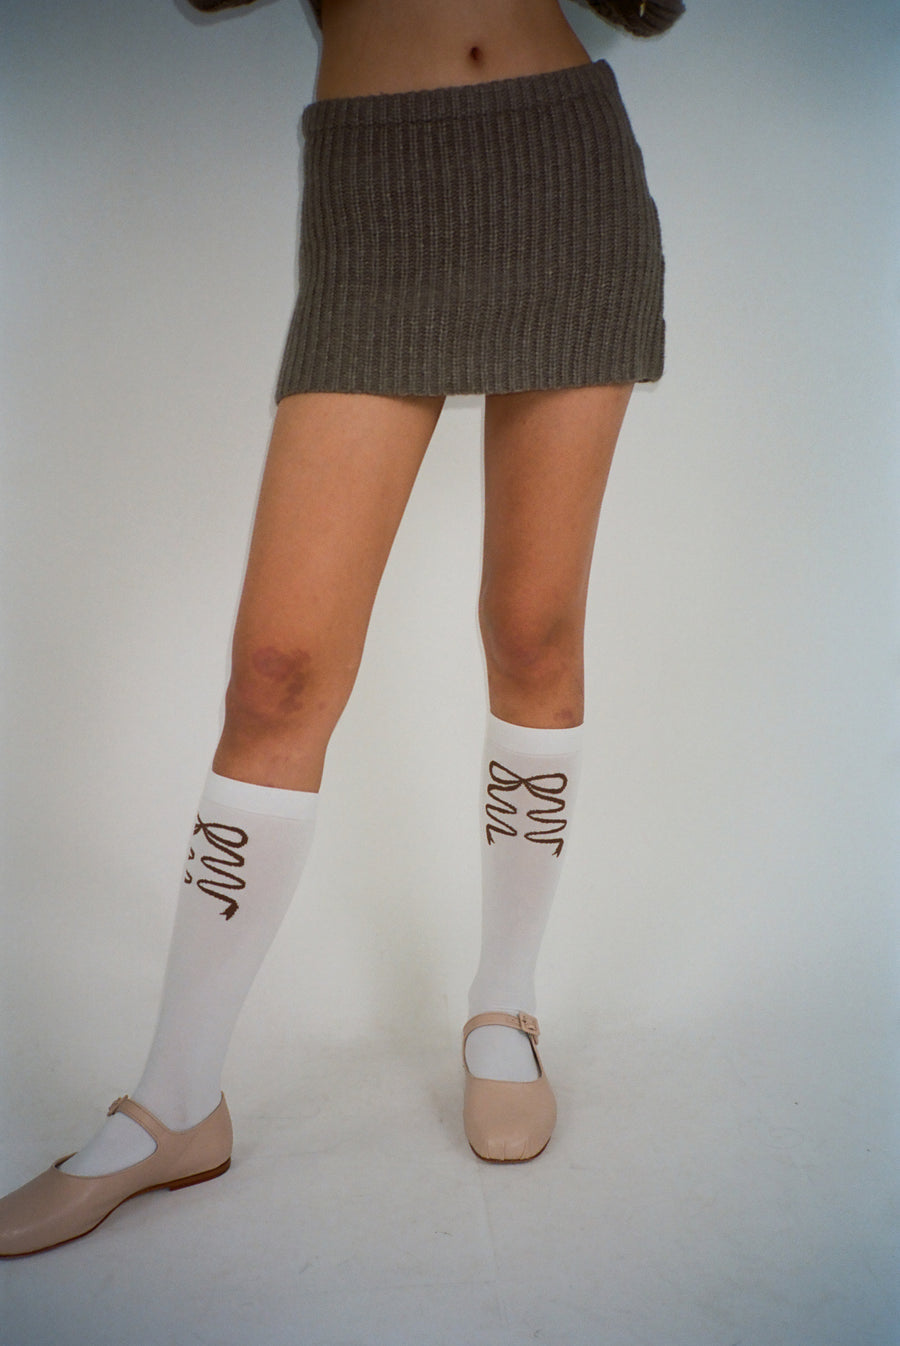 White knee high socks with brown bows on model